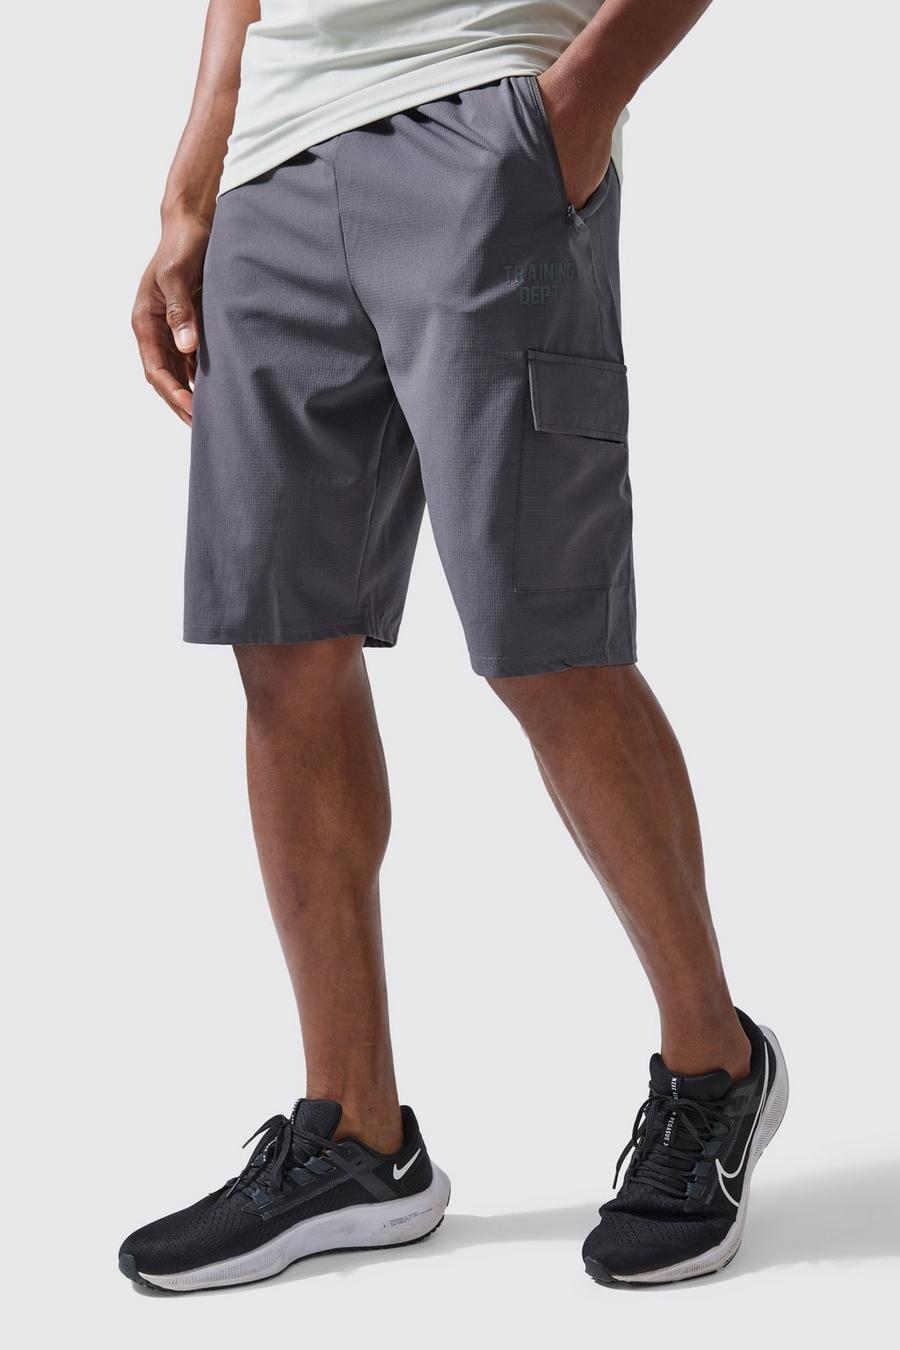 Charcoal Tall Active Training Dept Cargo Shorts